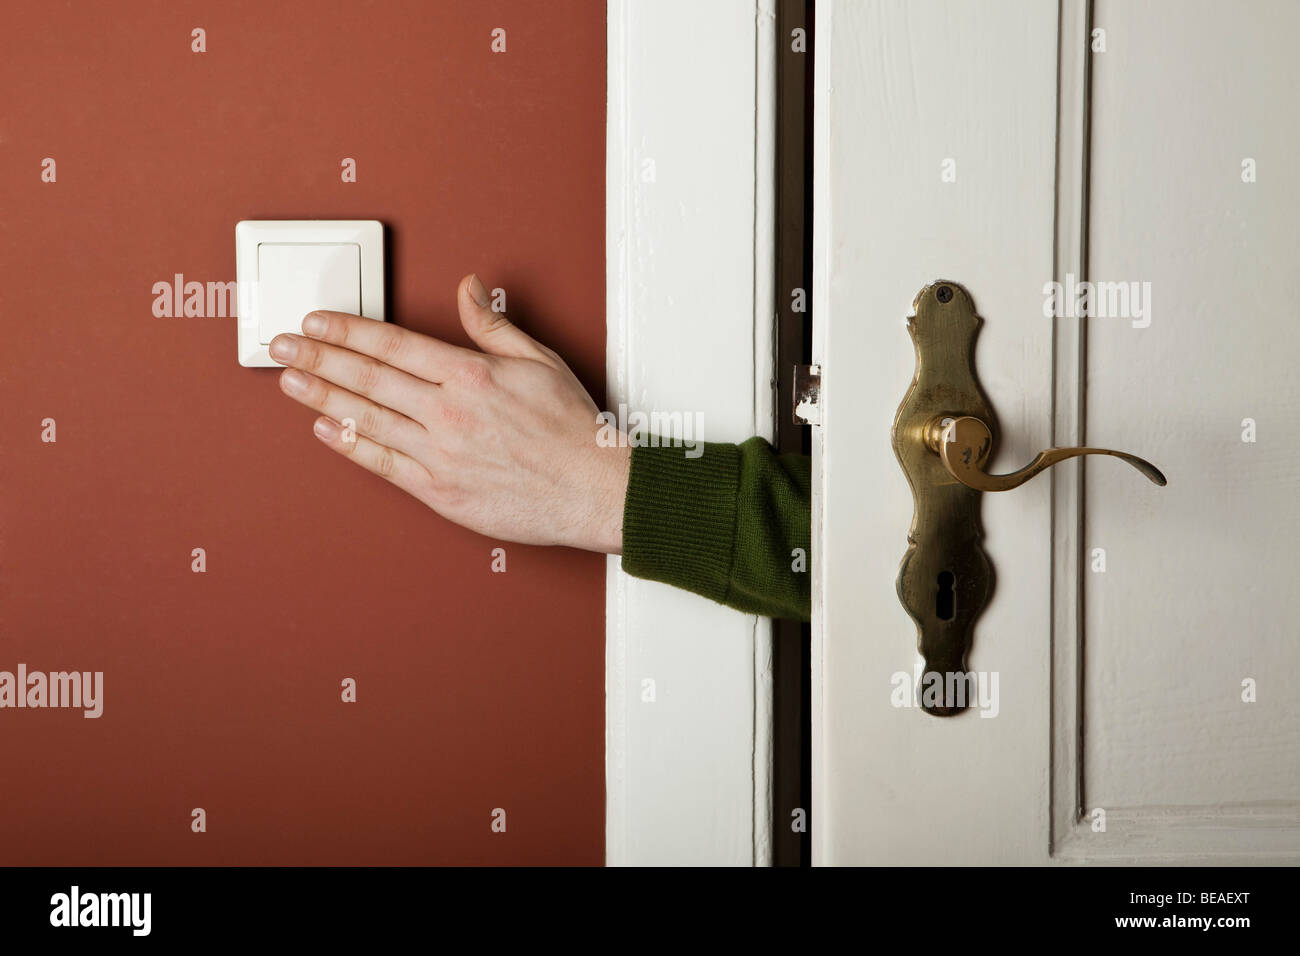 A hand turning off a light switch Stock Photo